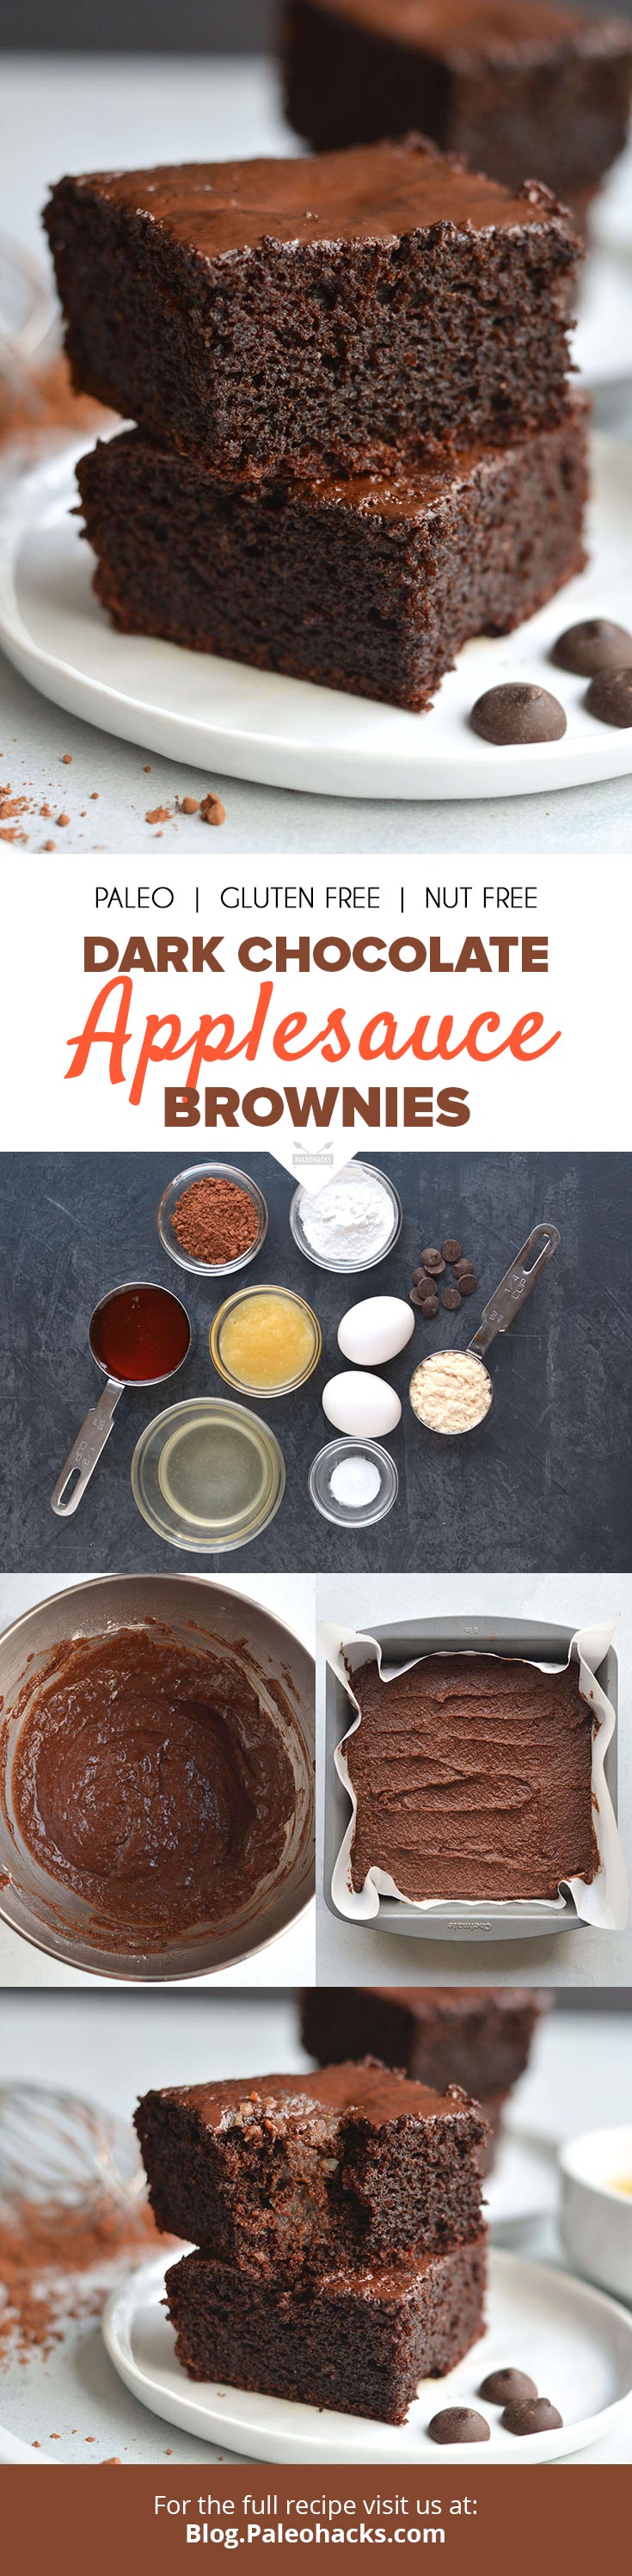 Applesauce gives these brownies a chewy, silky texture that’s absolutely droolworthy. Baking with unsweetened applesauce is also a great way to reduce sugar.